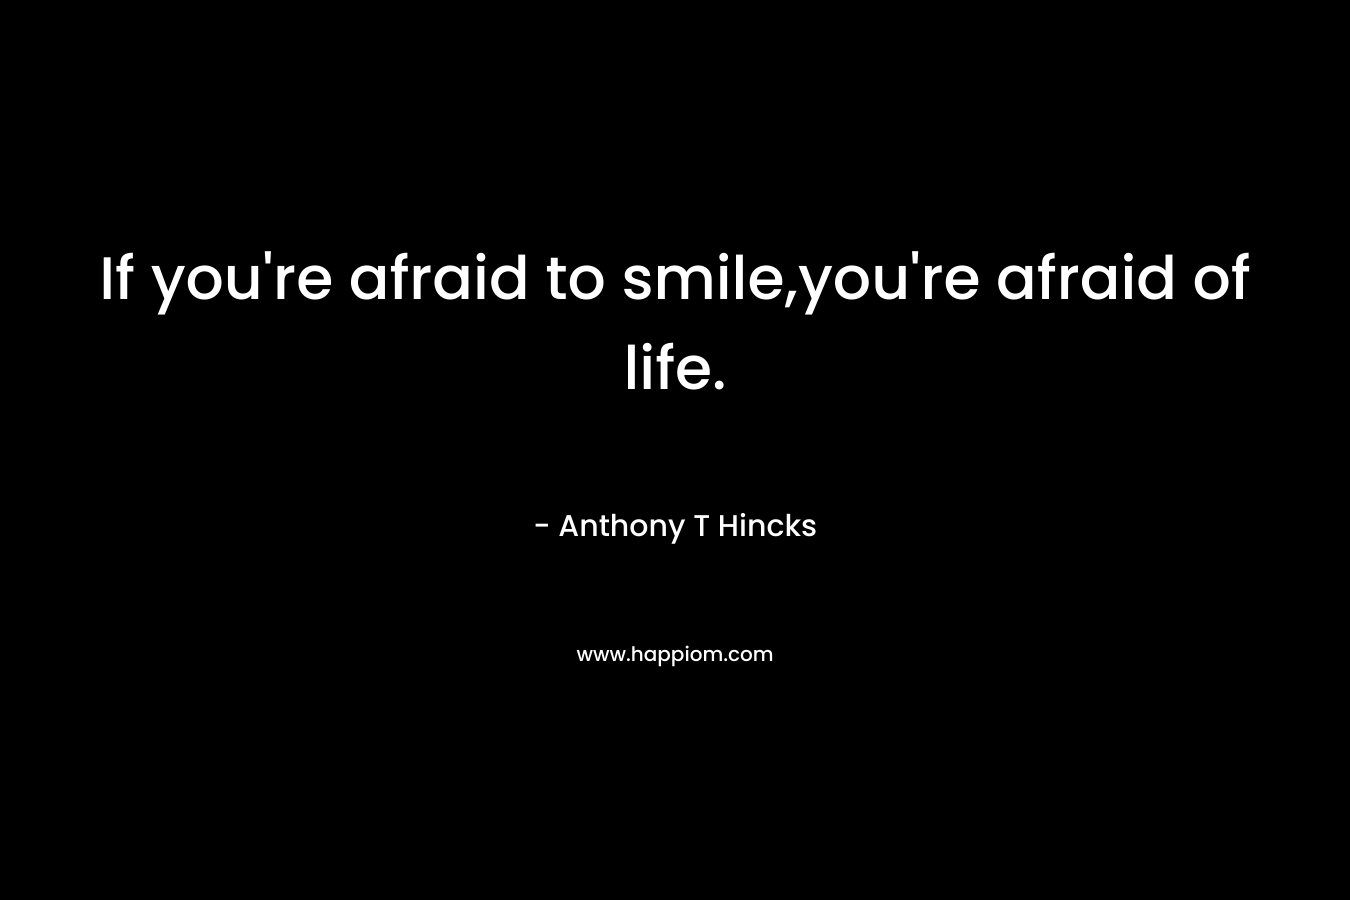 If you’re afraid to smile,you’re afraid of life. – Anthony T Hincks